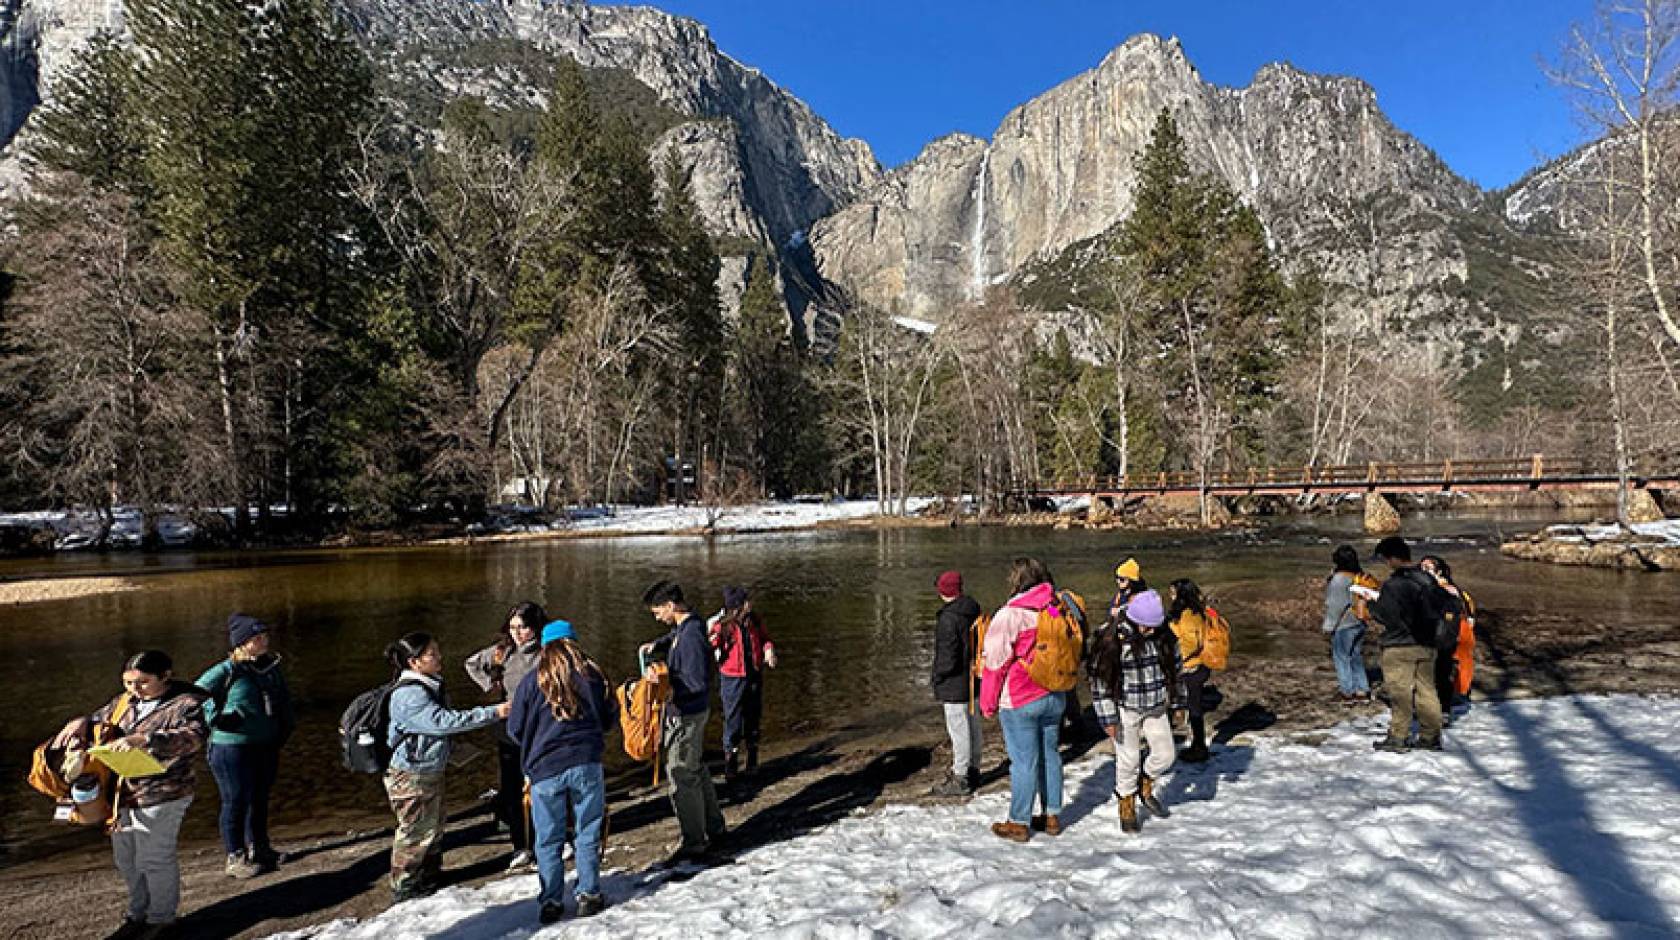 On a sunny day, a group of students gathers on the banks of a river, with snow on the ground and dramatic mountain peaks with a waterfall and forest in the background. 